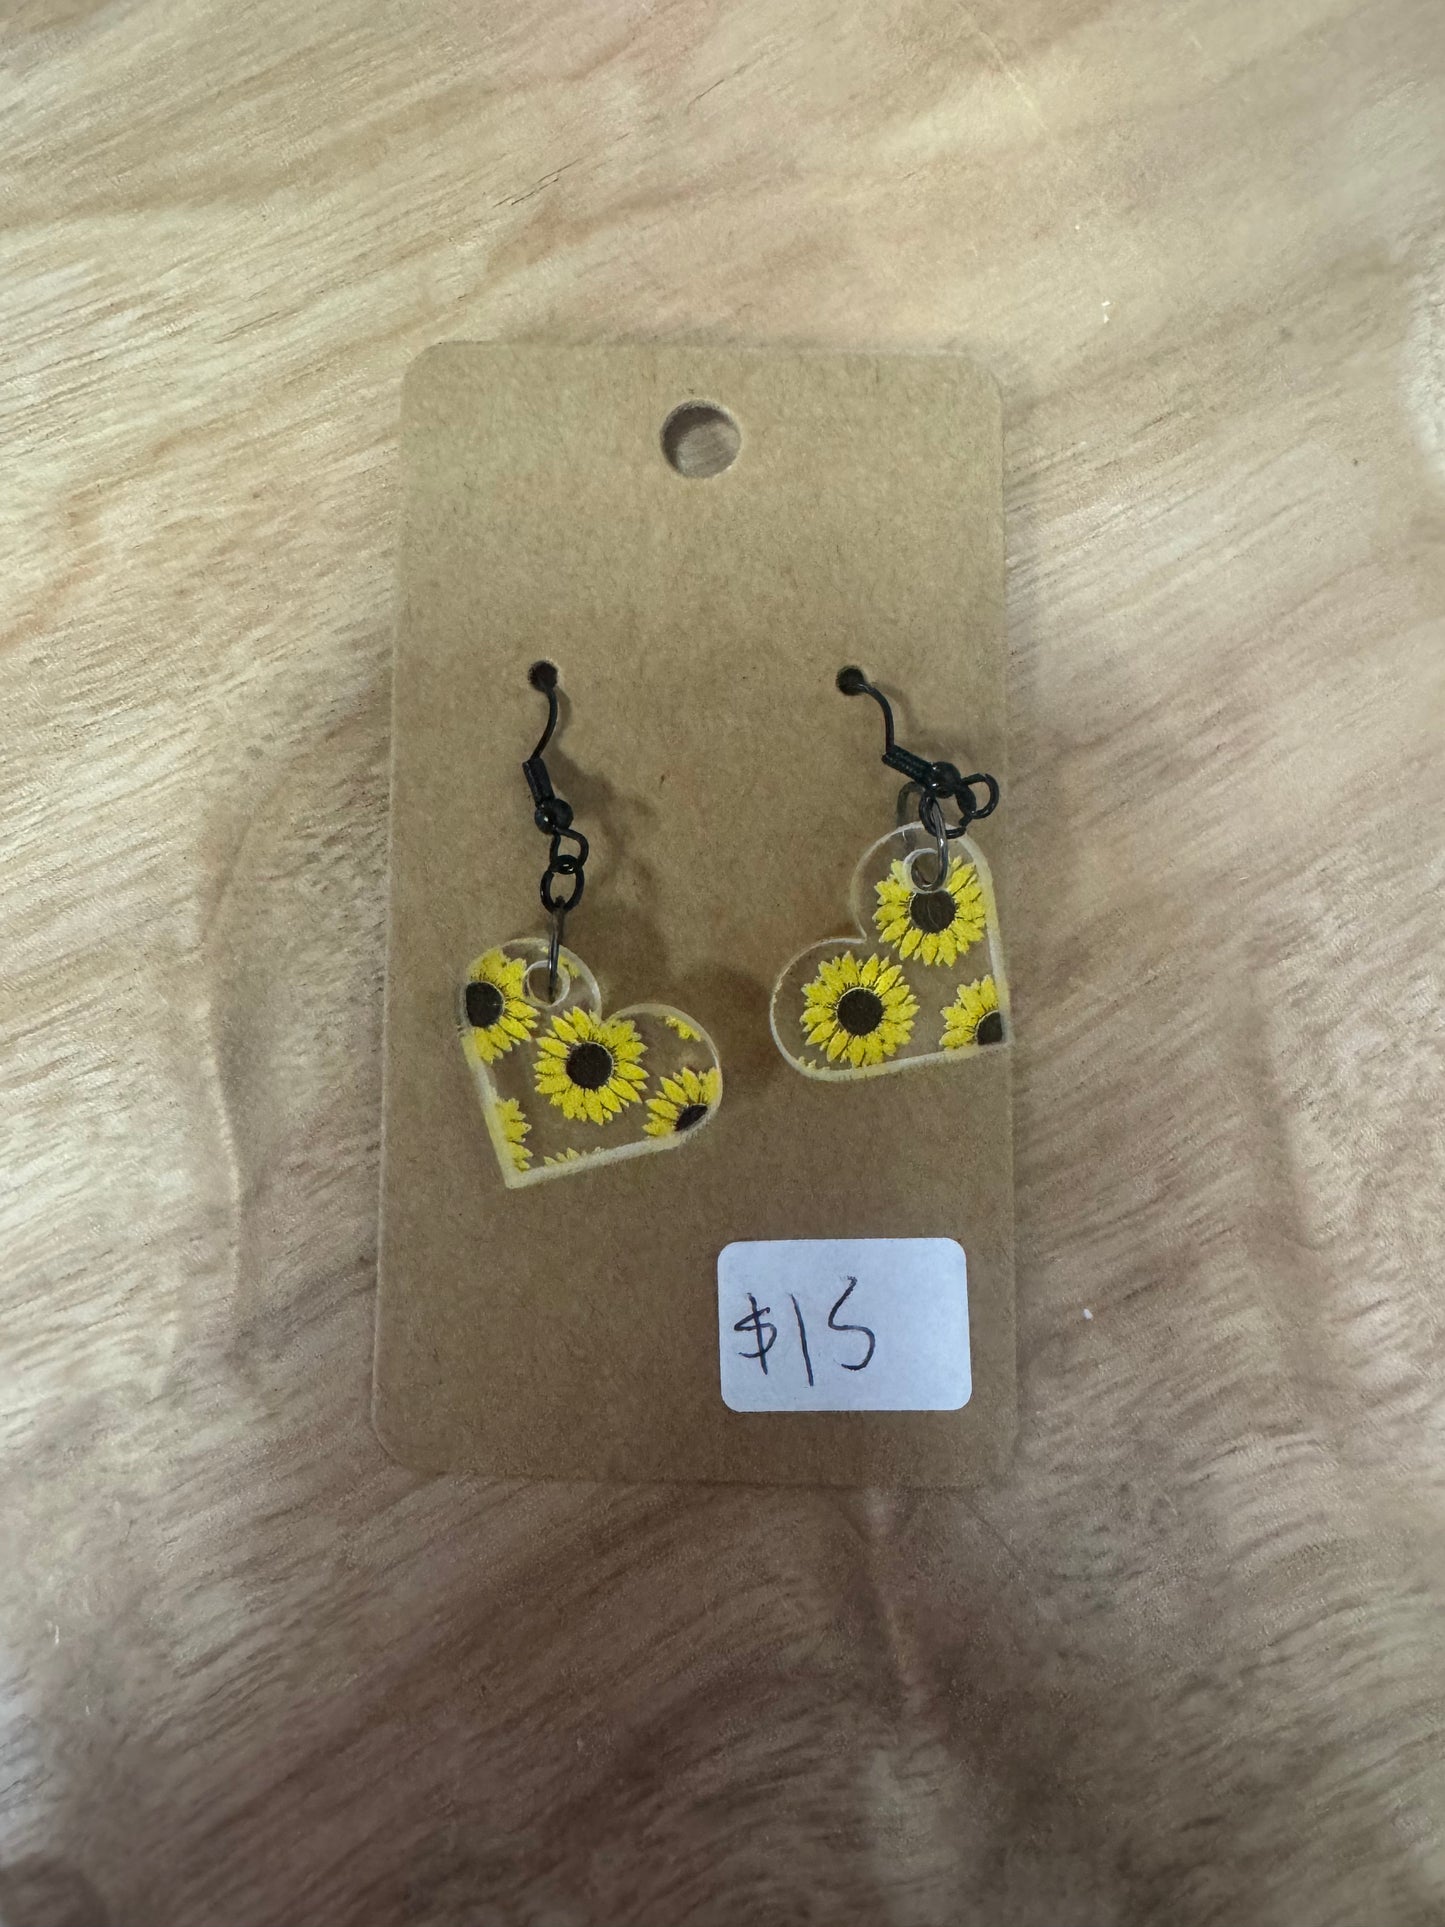 Local made earrings by the Chicks